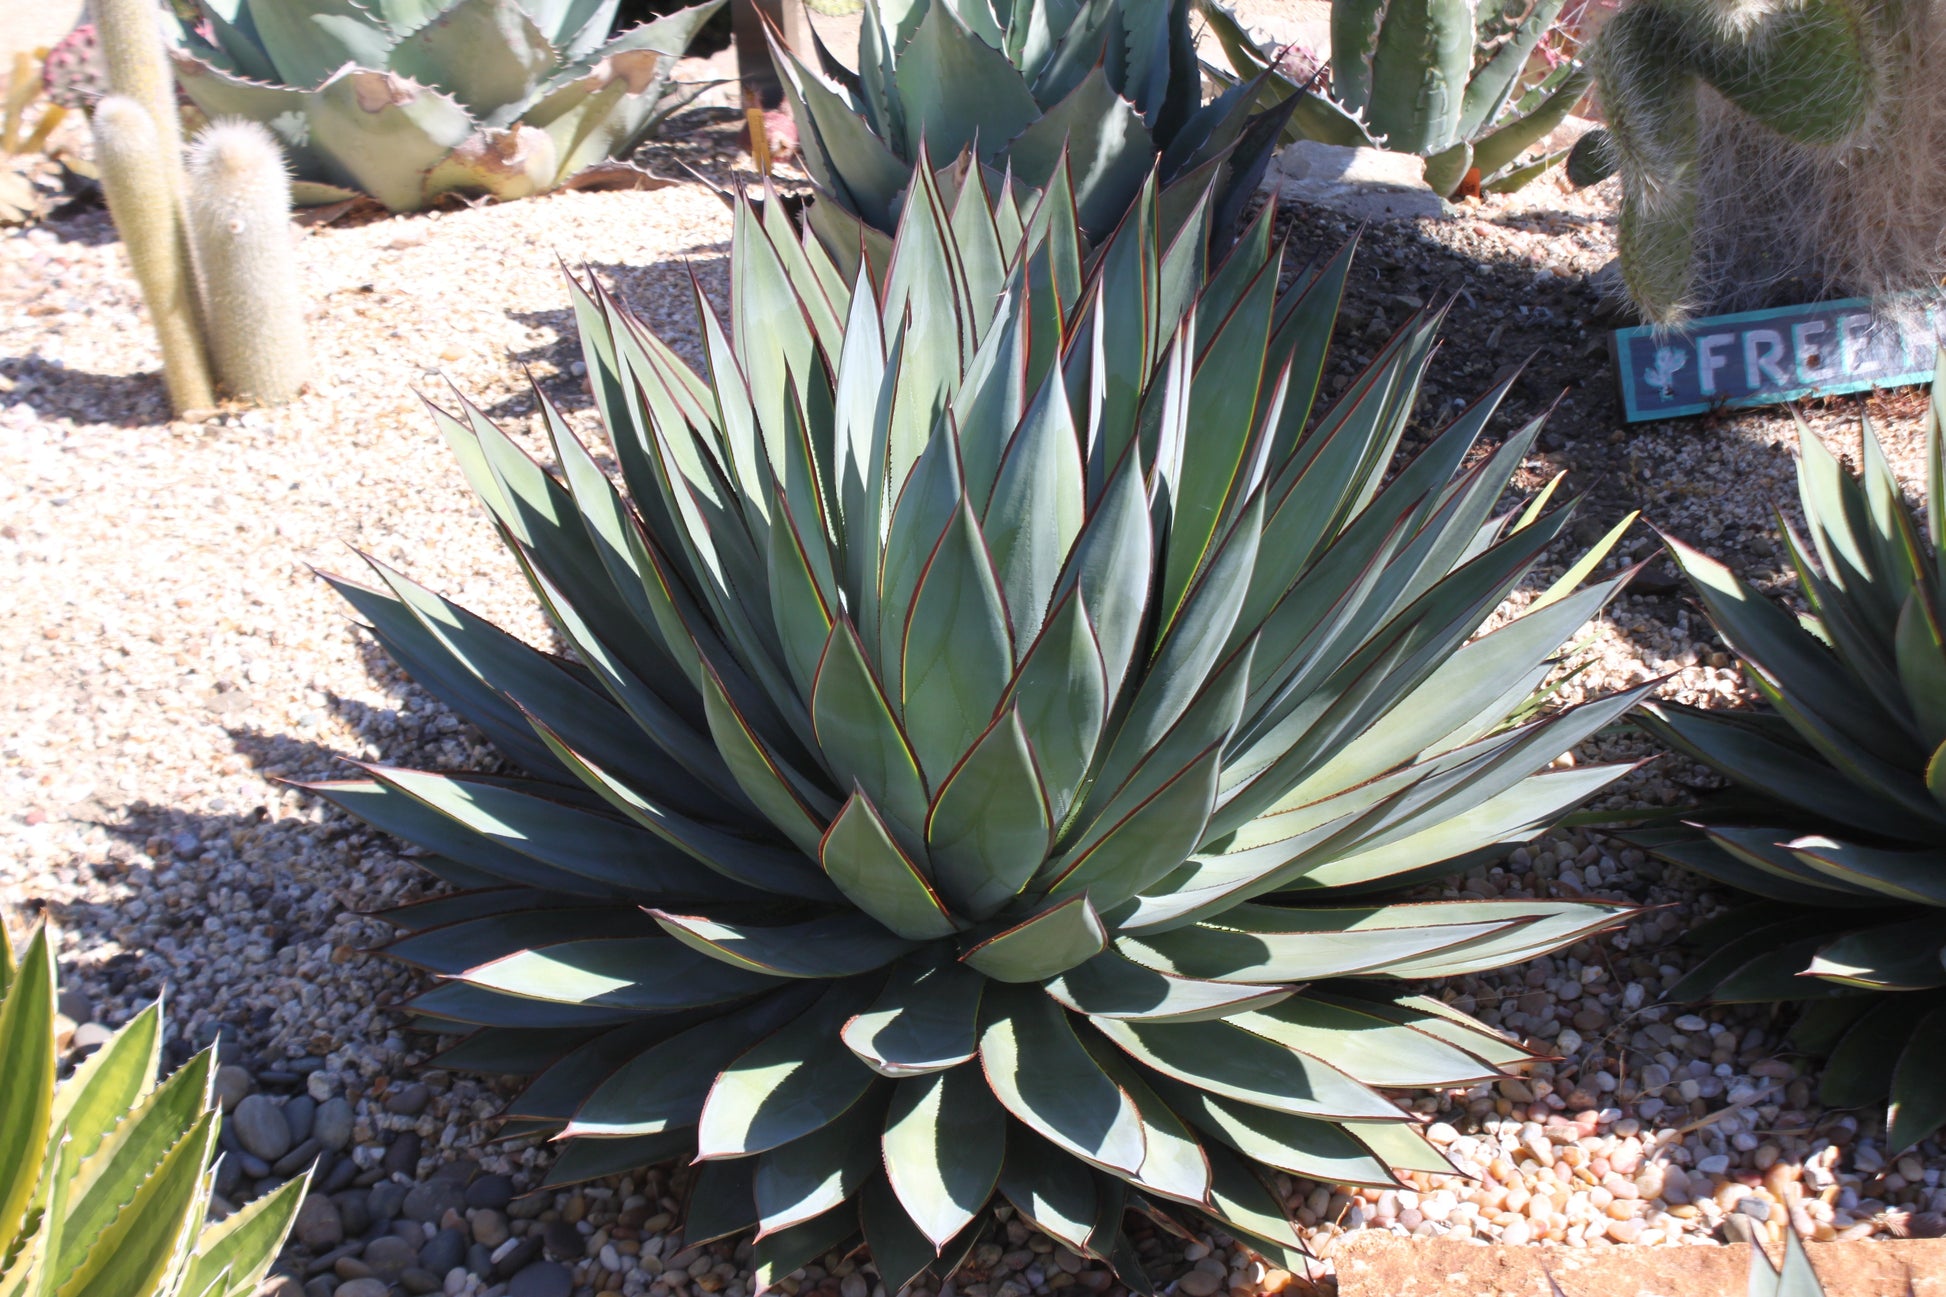 A mature Agave BlueGlow planted in garden